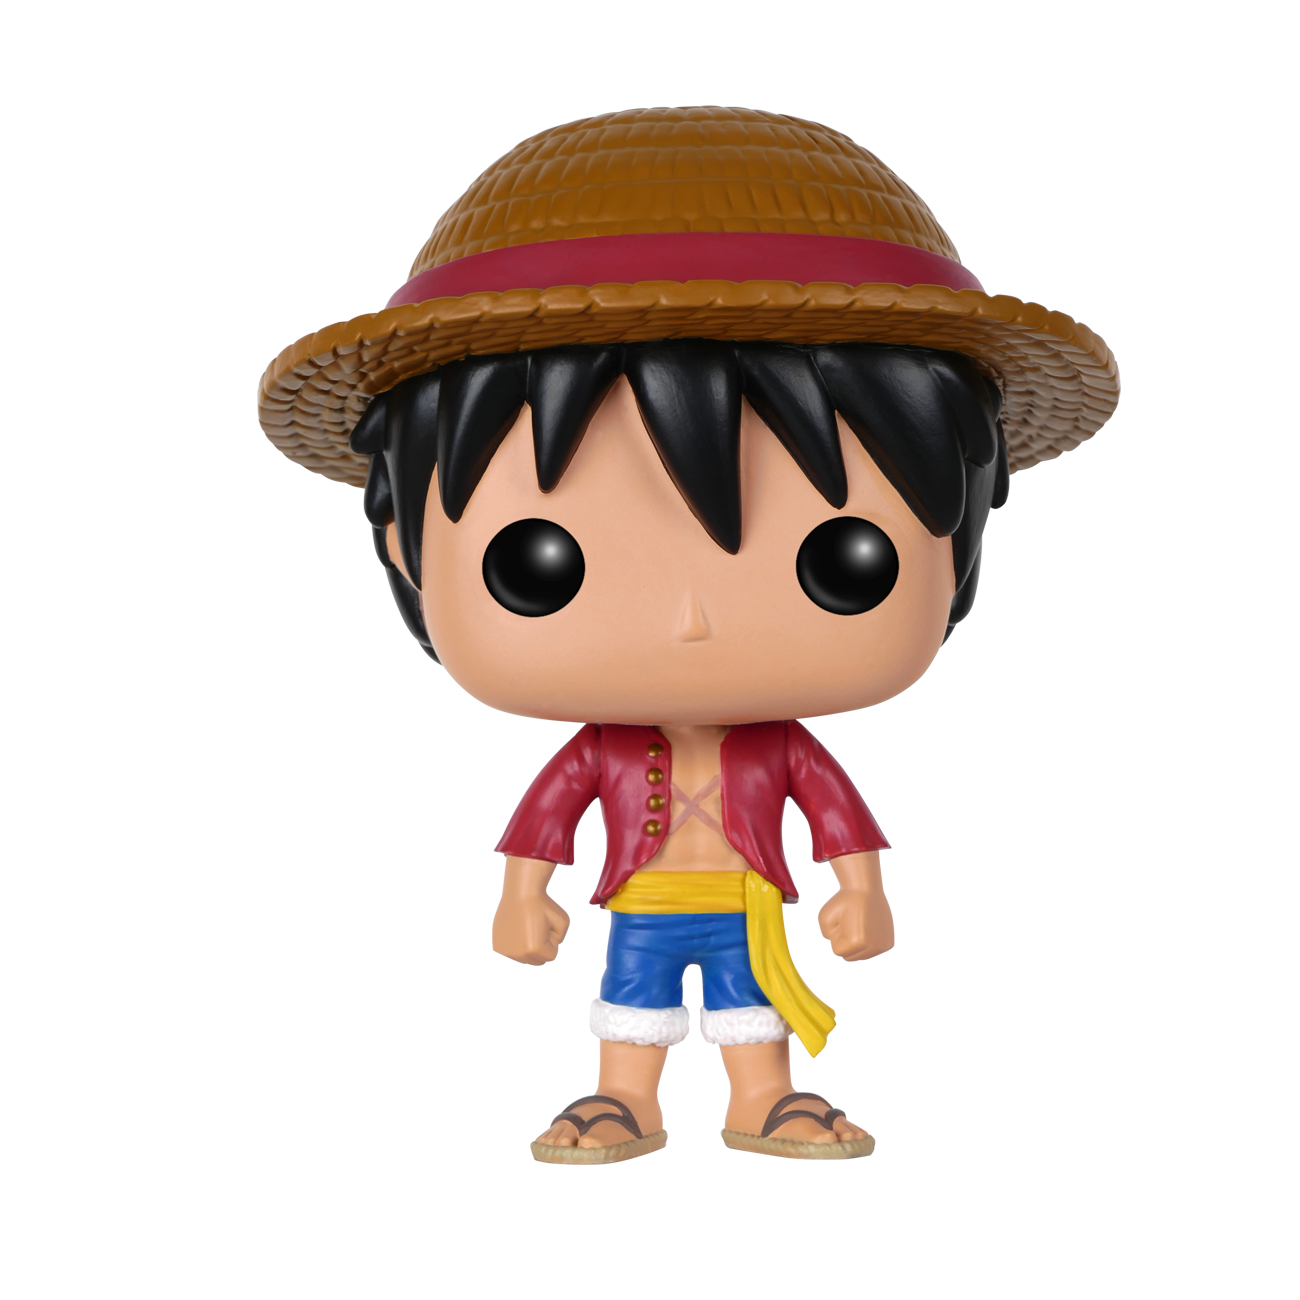 Photos - Action Figures / Transformers Funko POP! Monkey. D. Luffy - One Piece 